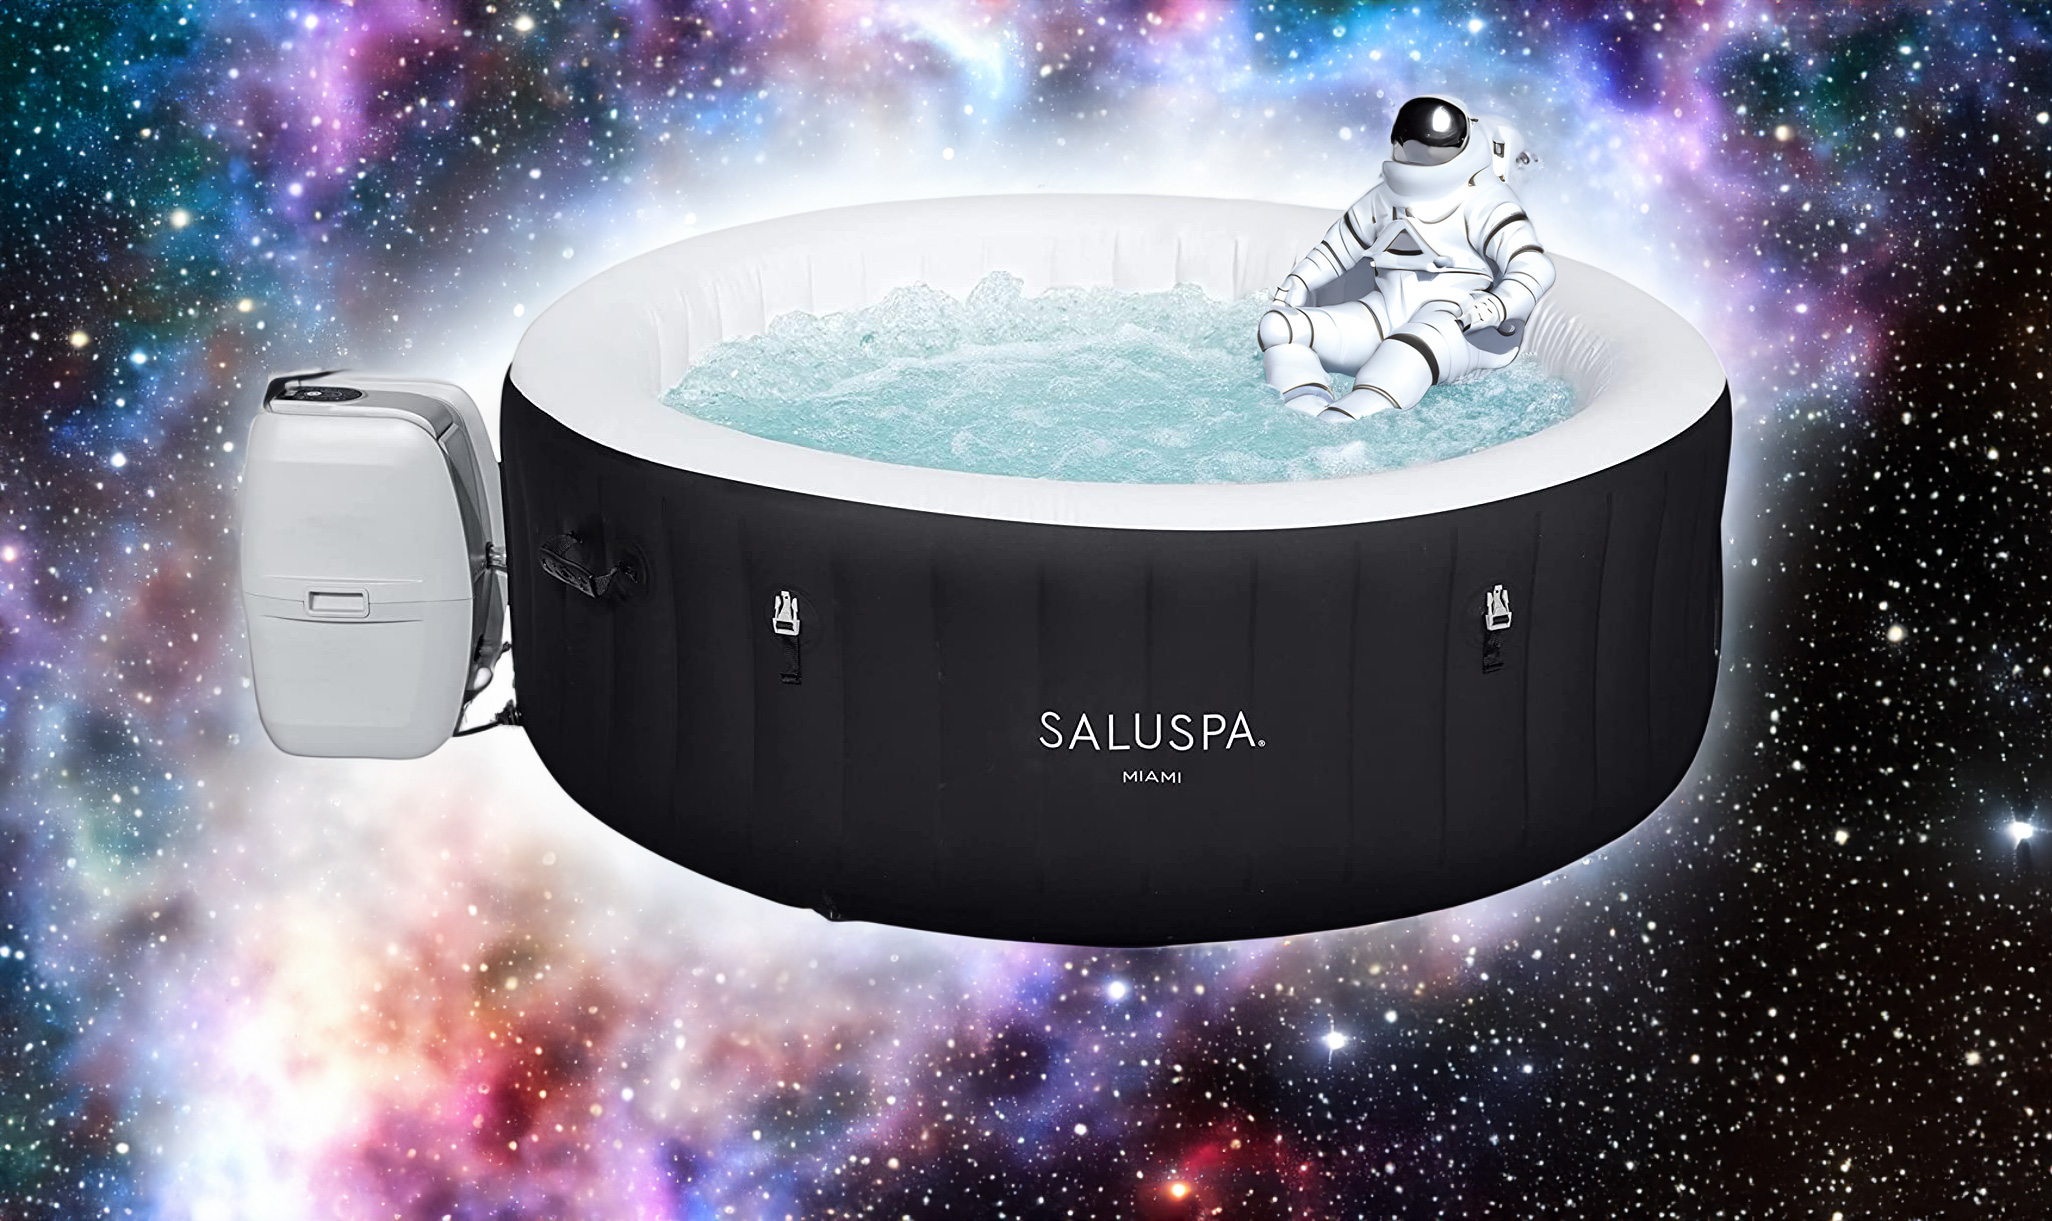 Upgrade your summer with a deeply discounted outdoor hot tub or ice bath